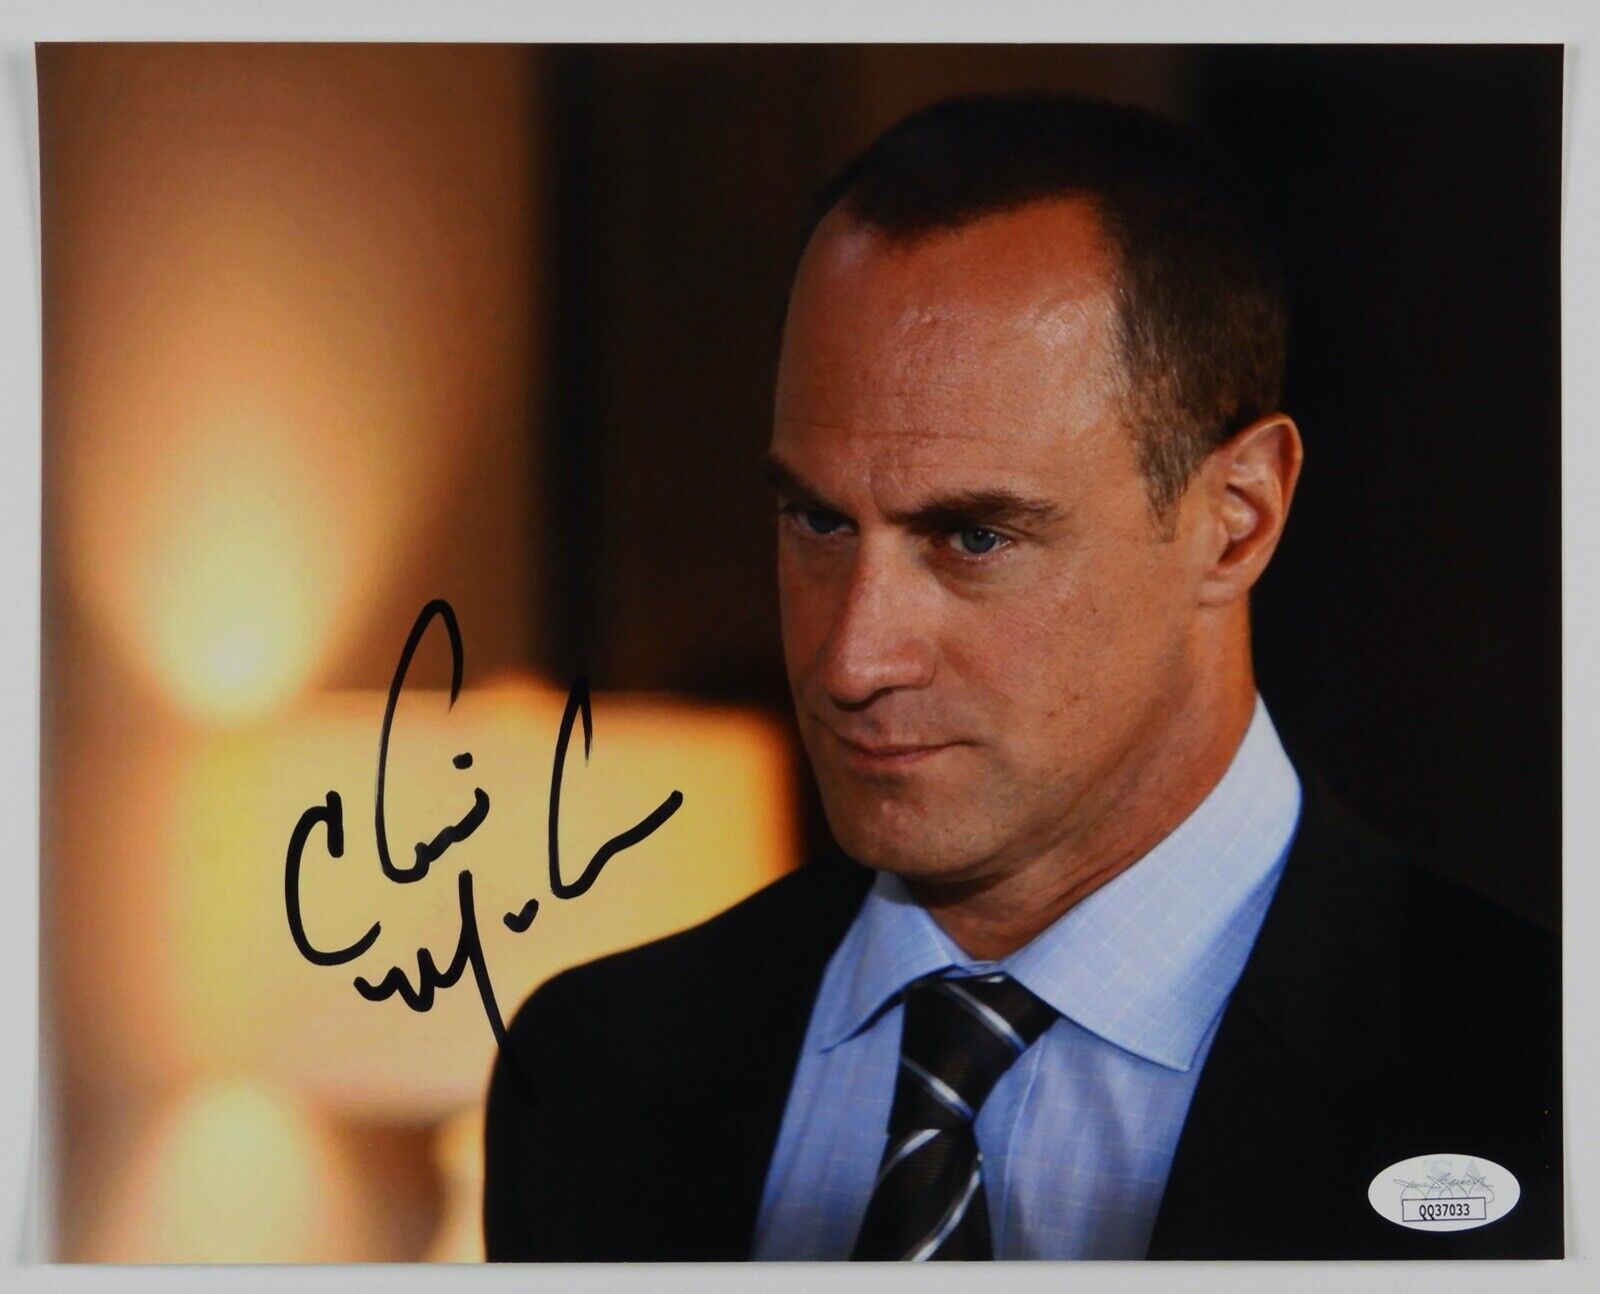 Christopher Meloni Law And Order SVU Signed JSA Autograph Photo Poster painting 8 x 10